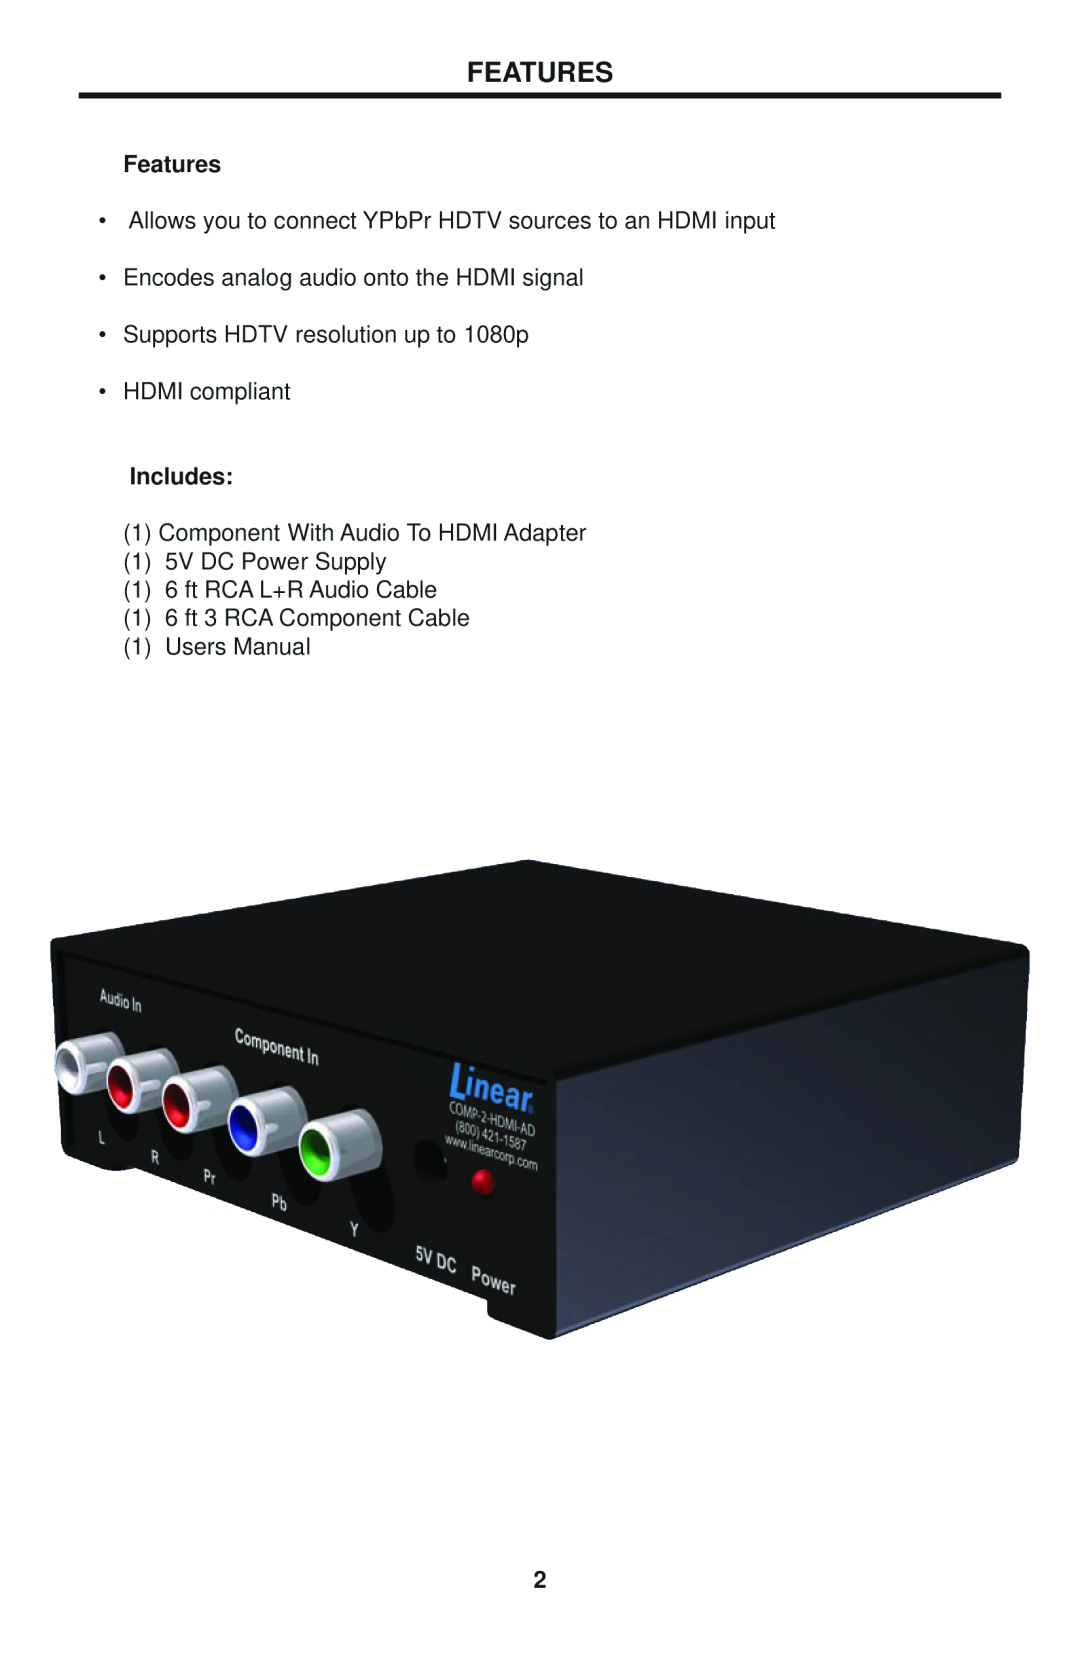 Linear COMP-2-HDMI-AD Features, Encodes analog audio onto the HDMI signal, Supports HDTV resolution up to 1080p, Includes 